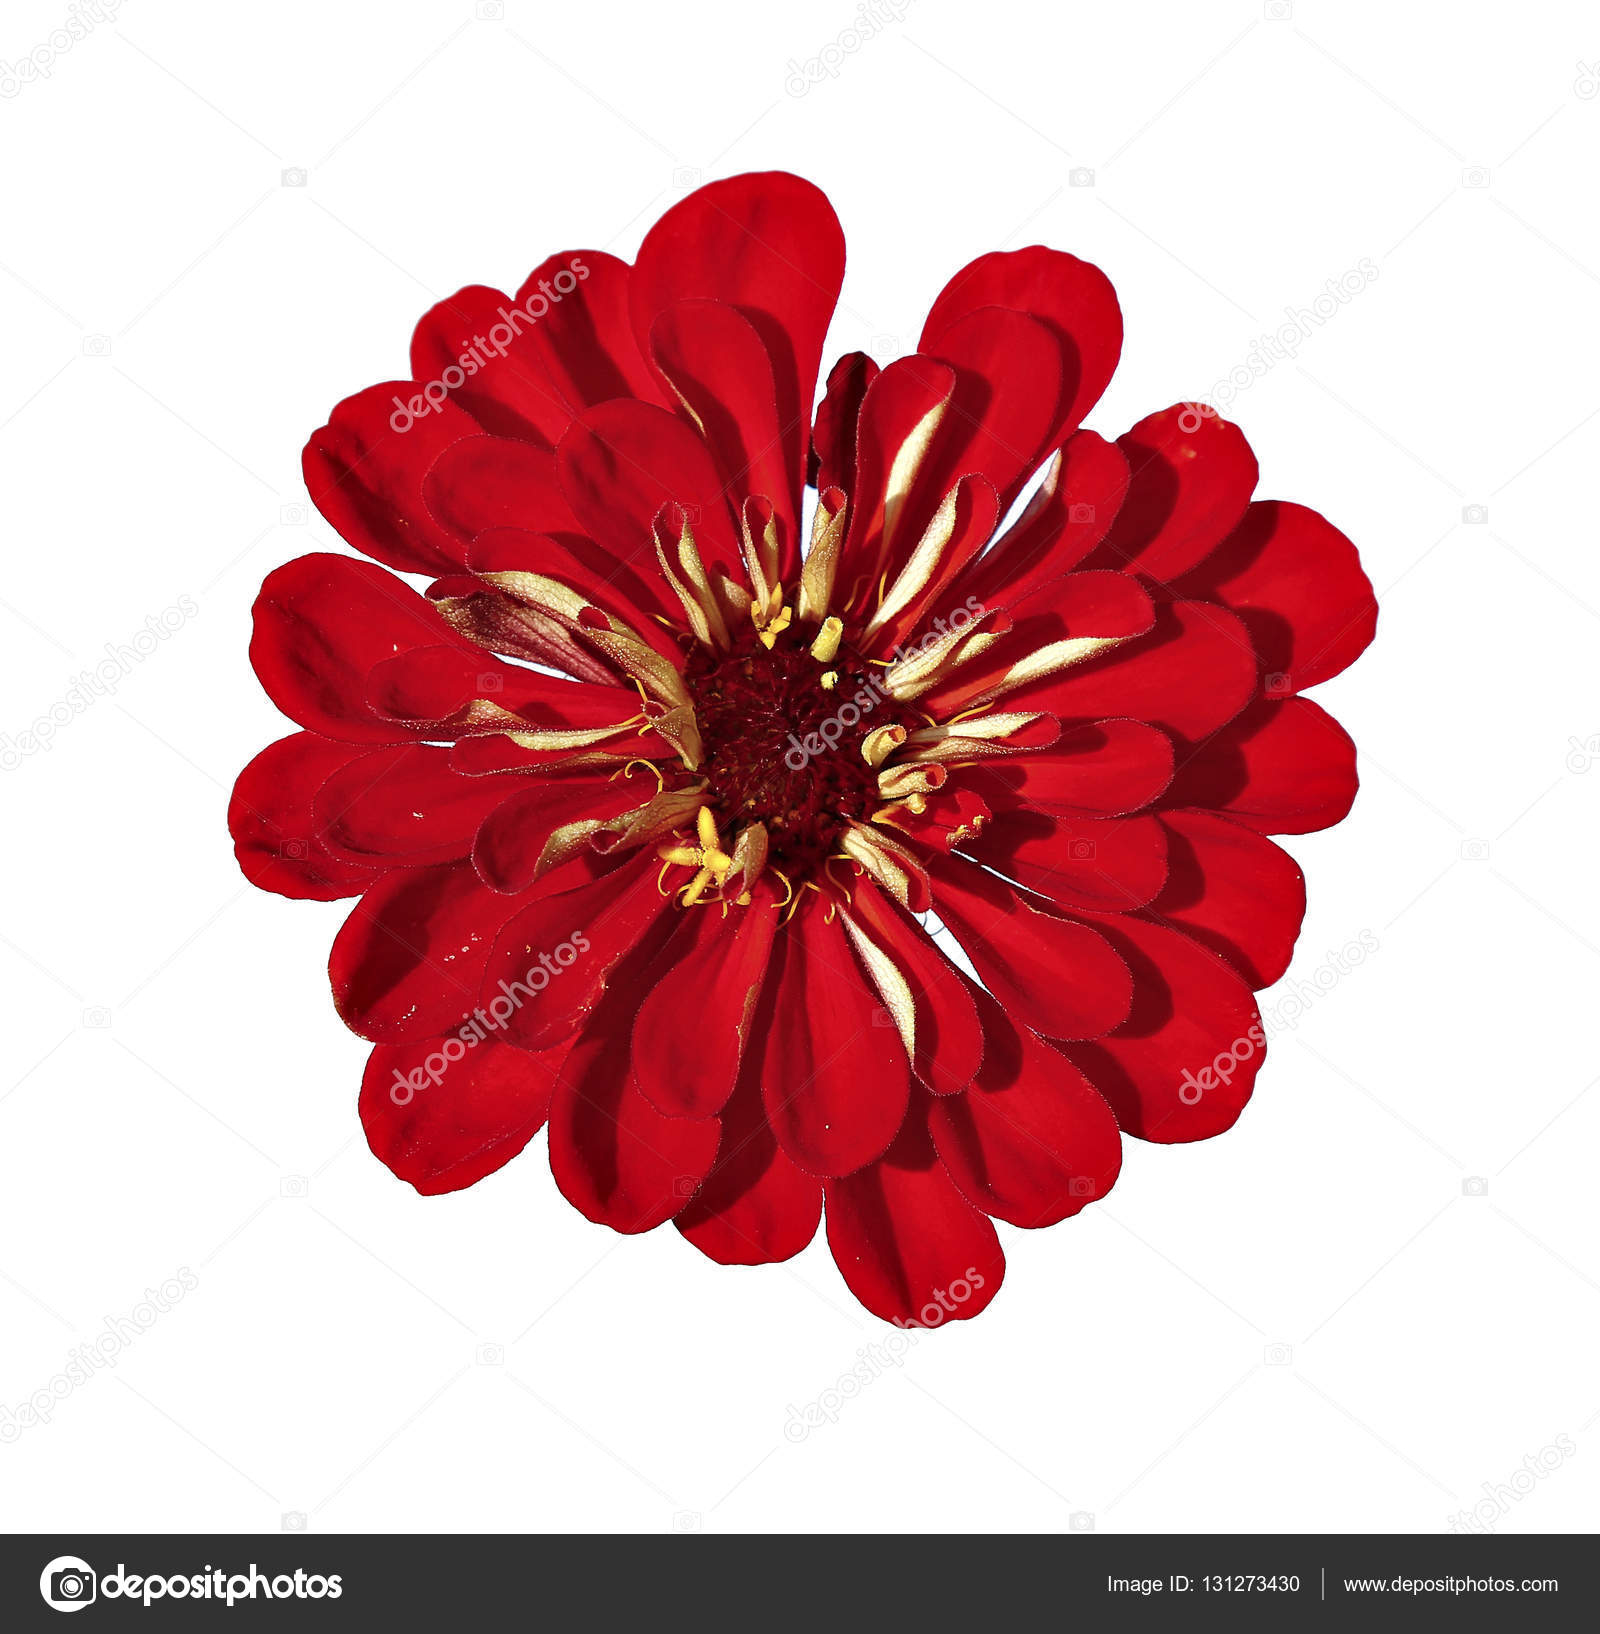 Isolated red flower photo